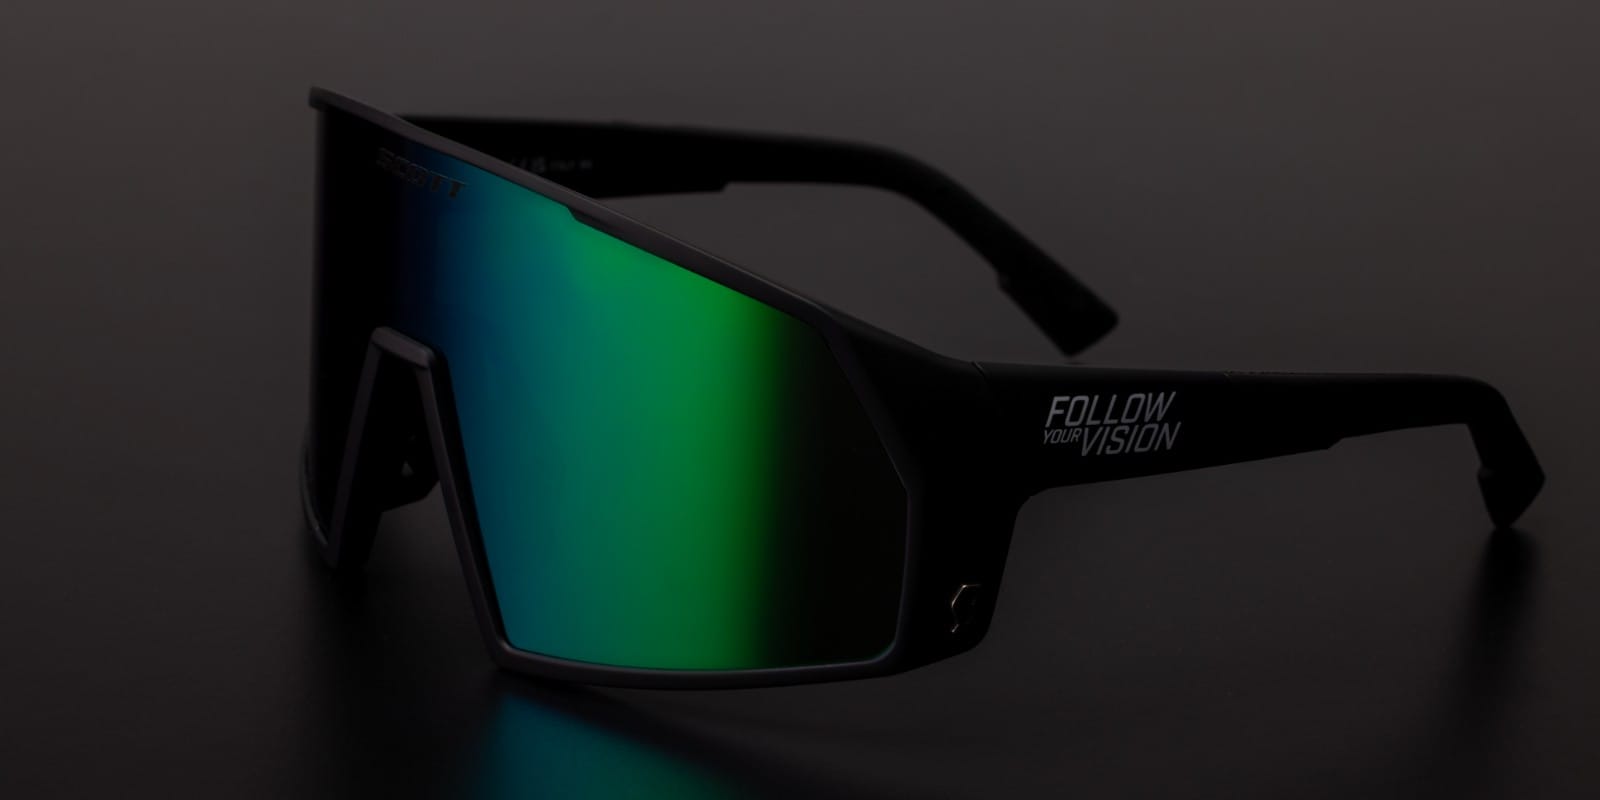 SCOTT Pro shield follow your vision sunglasses beauty shot, on a dark background, showing a blue to green reflect on the lens